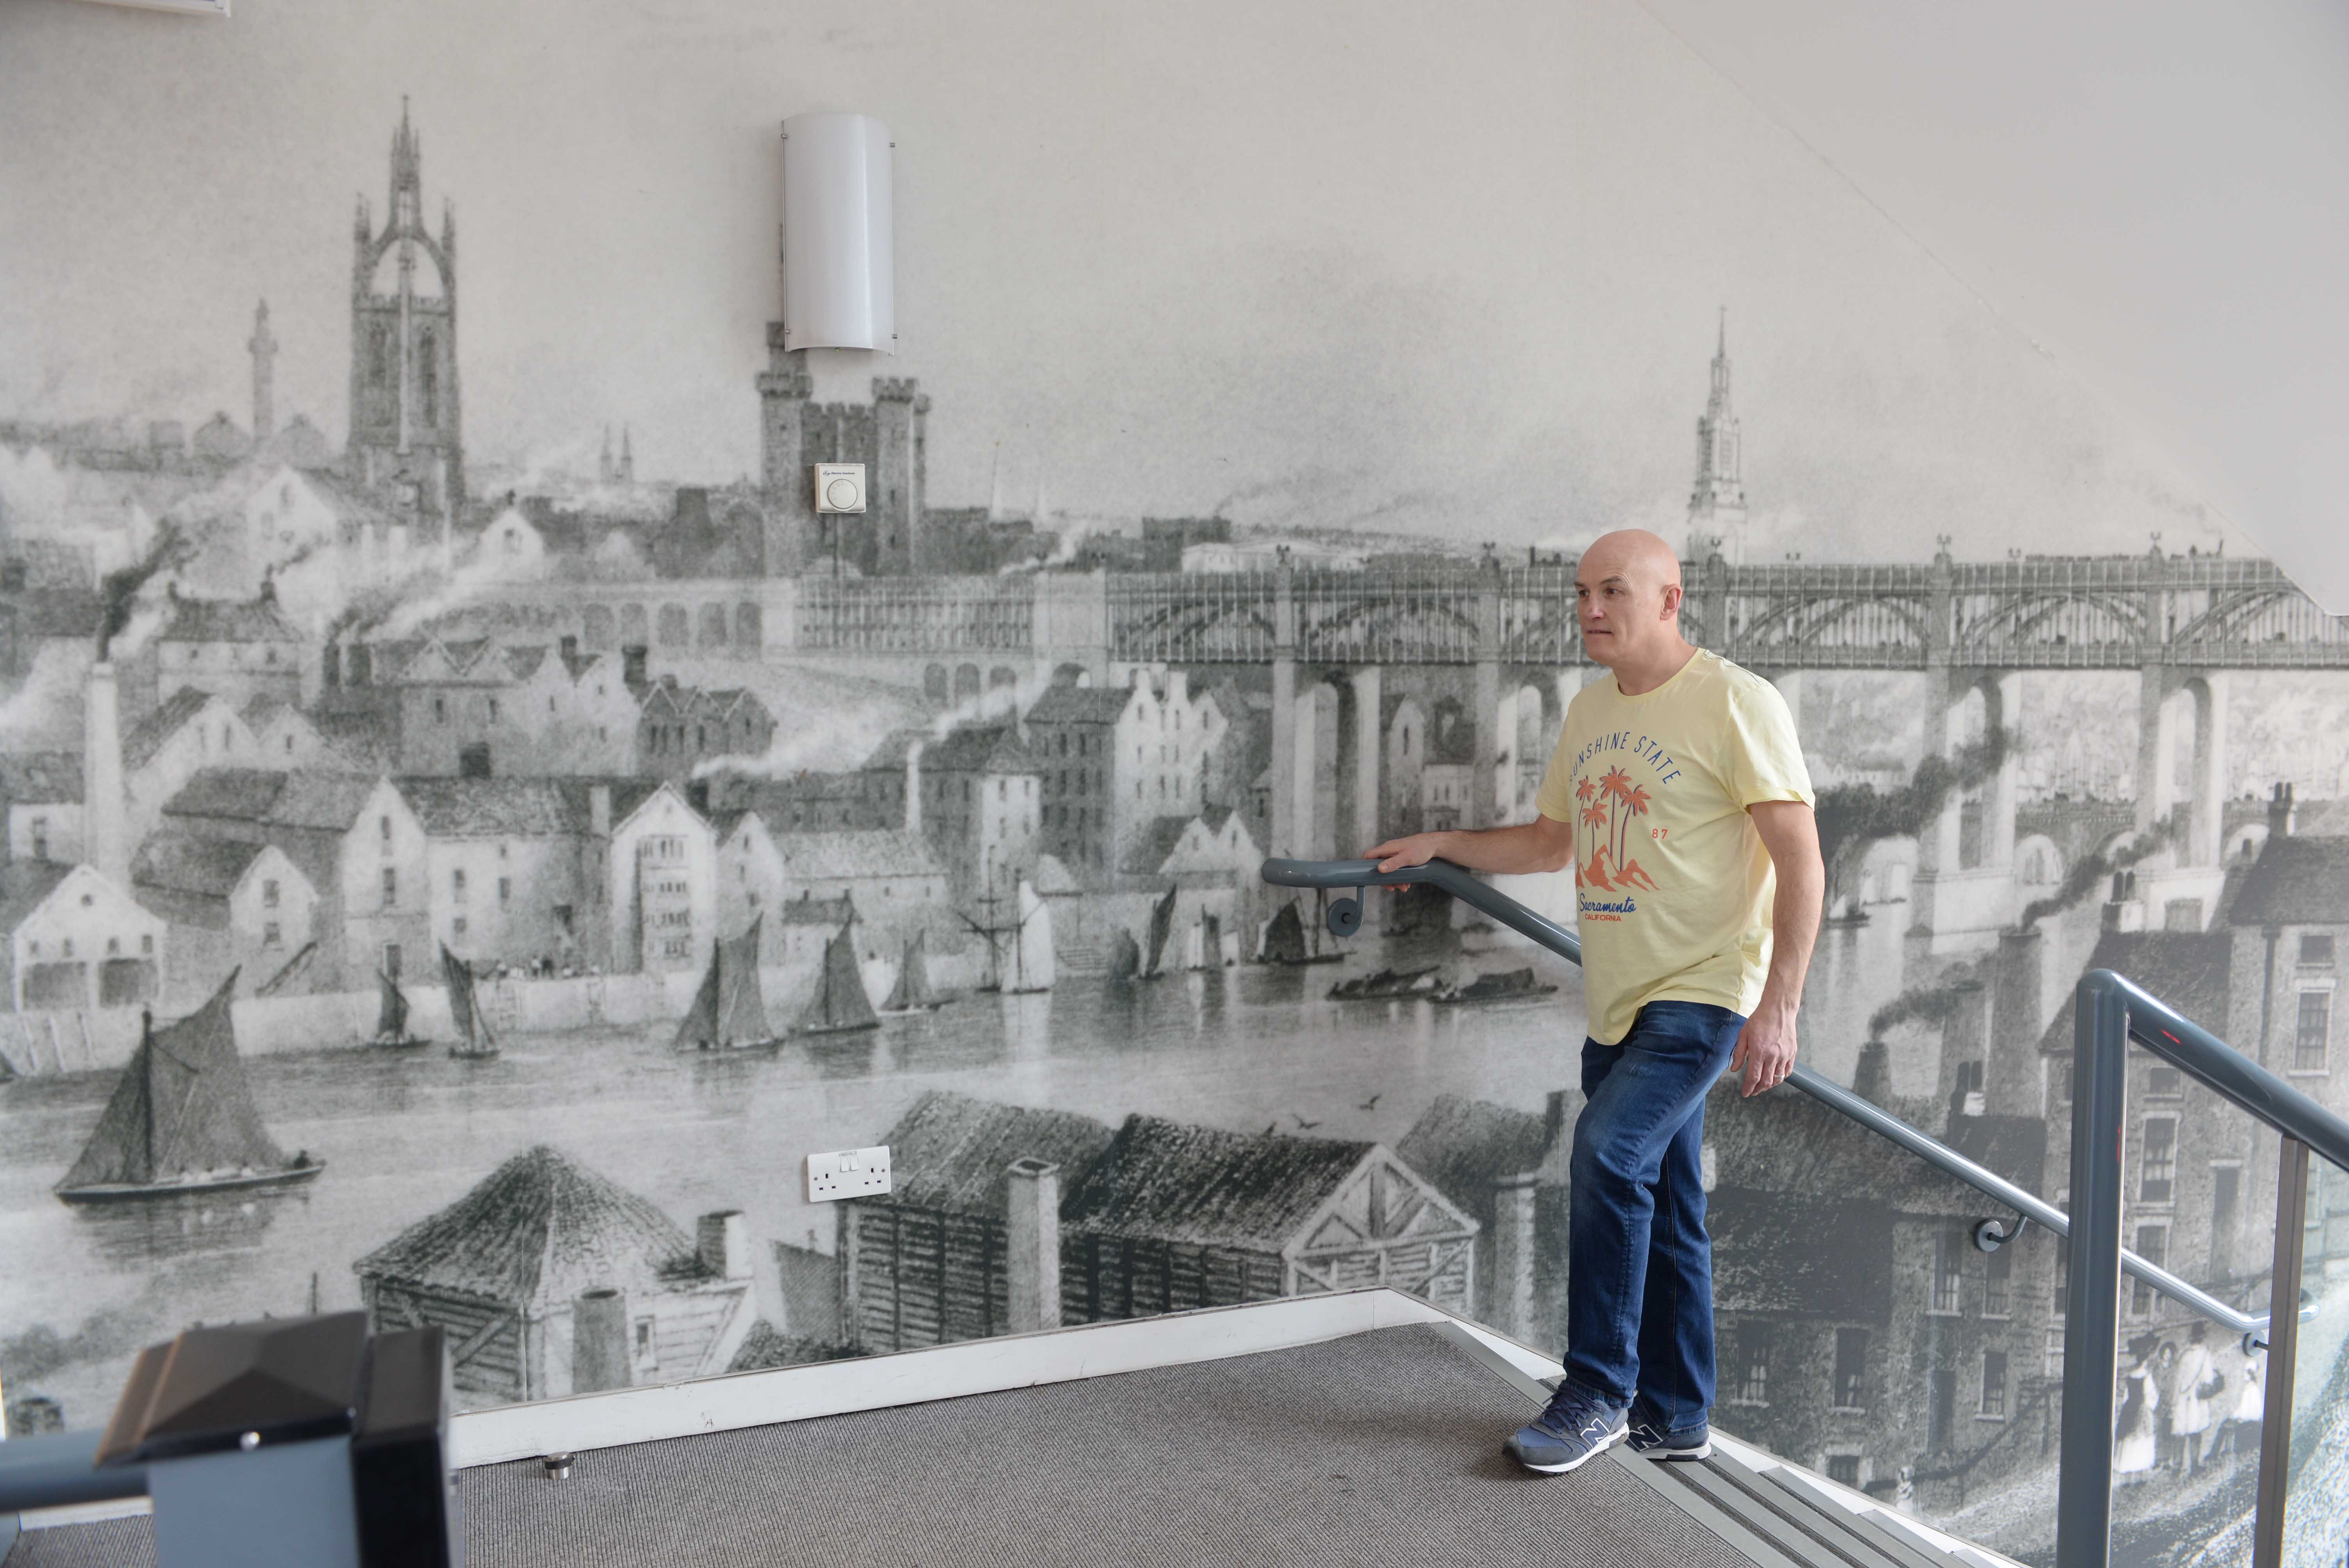 Very early photograph of Gateshead printed as wall graphic on staircase from entrance